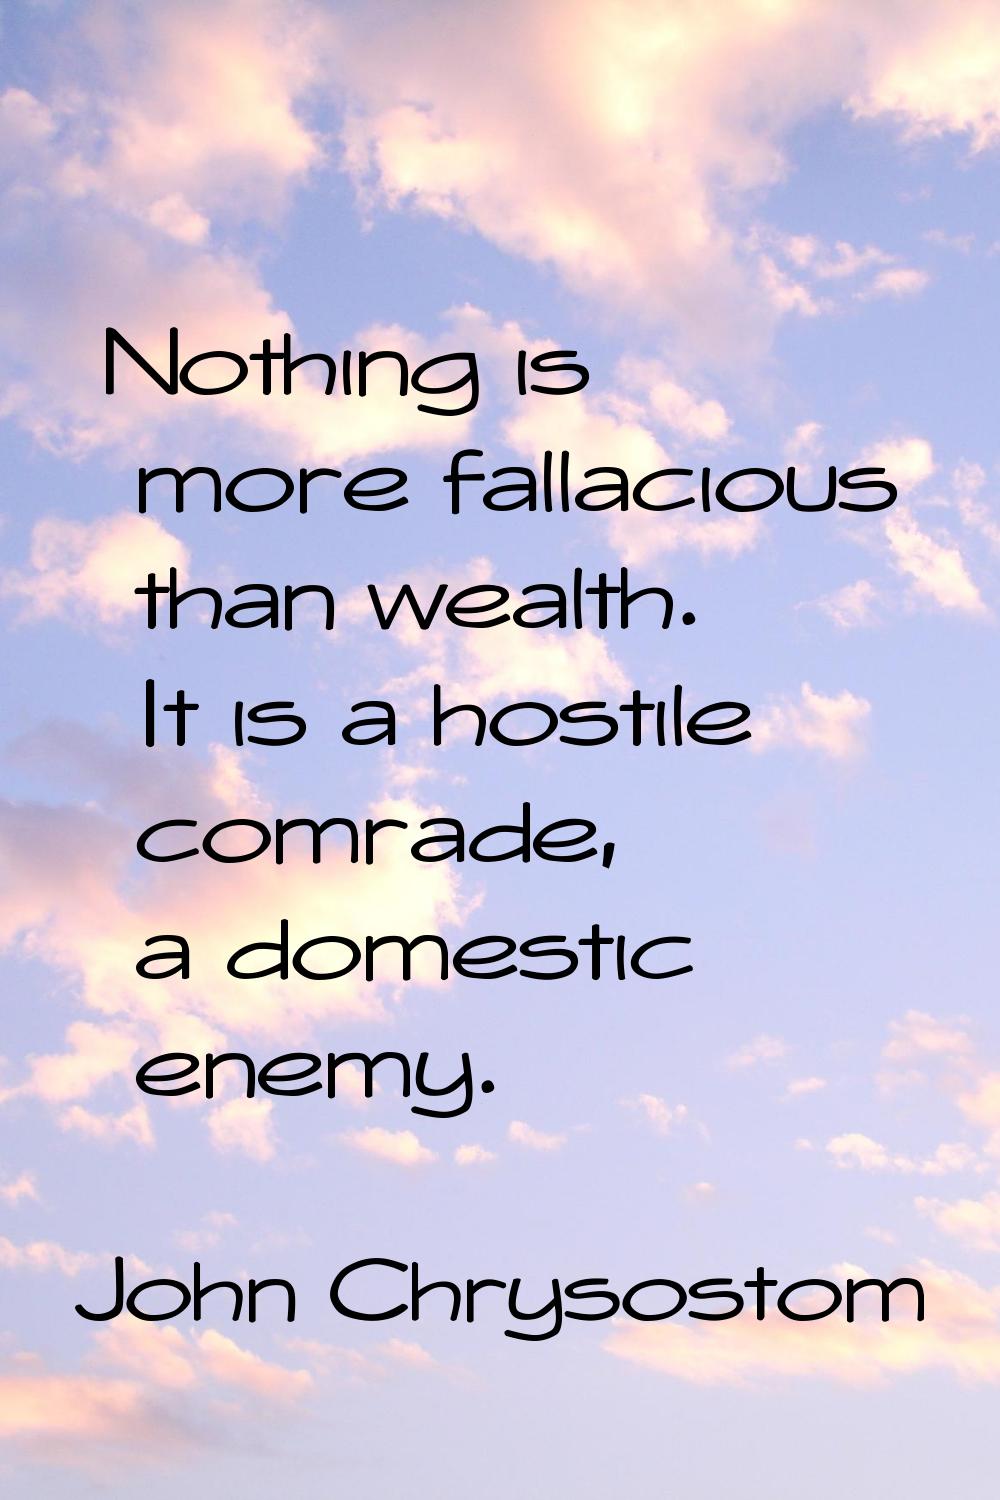 Nothing is more fallacious than wealth. It is a hostile comrade, a domestic enemy.